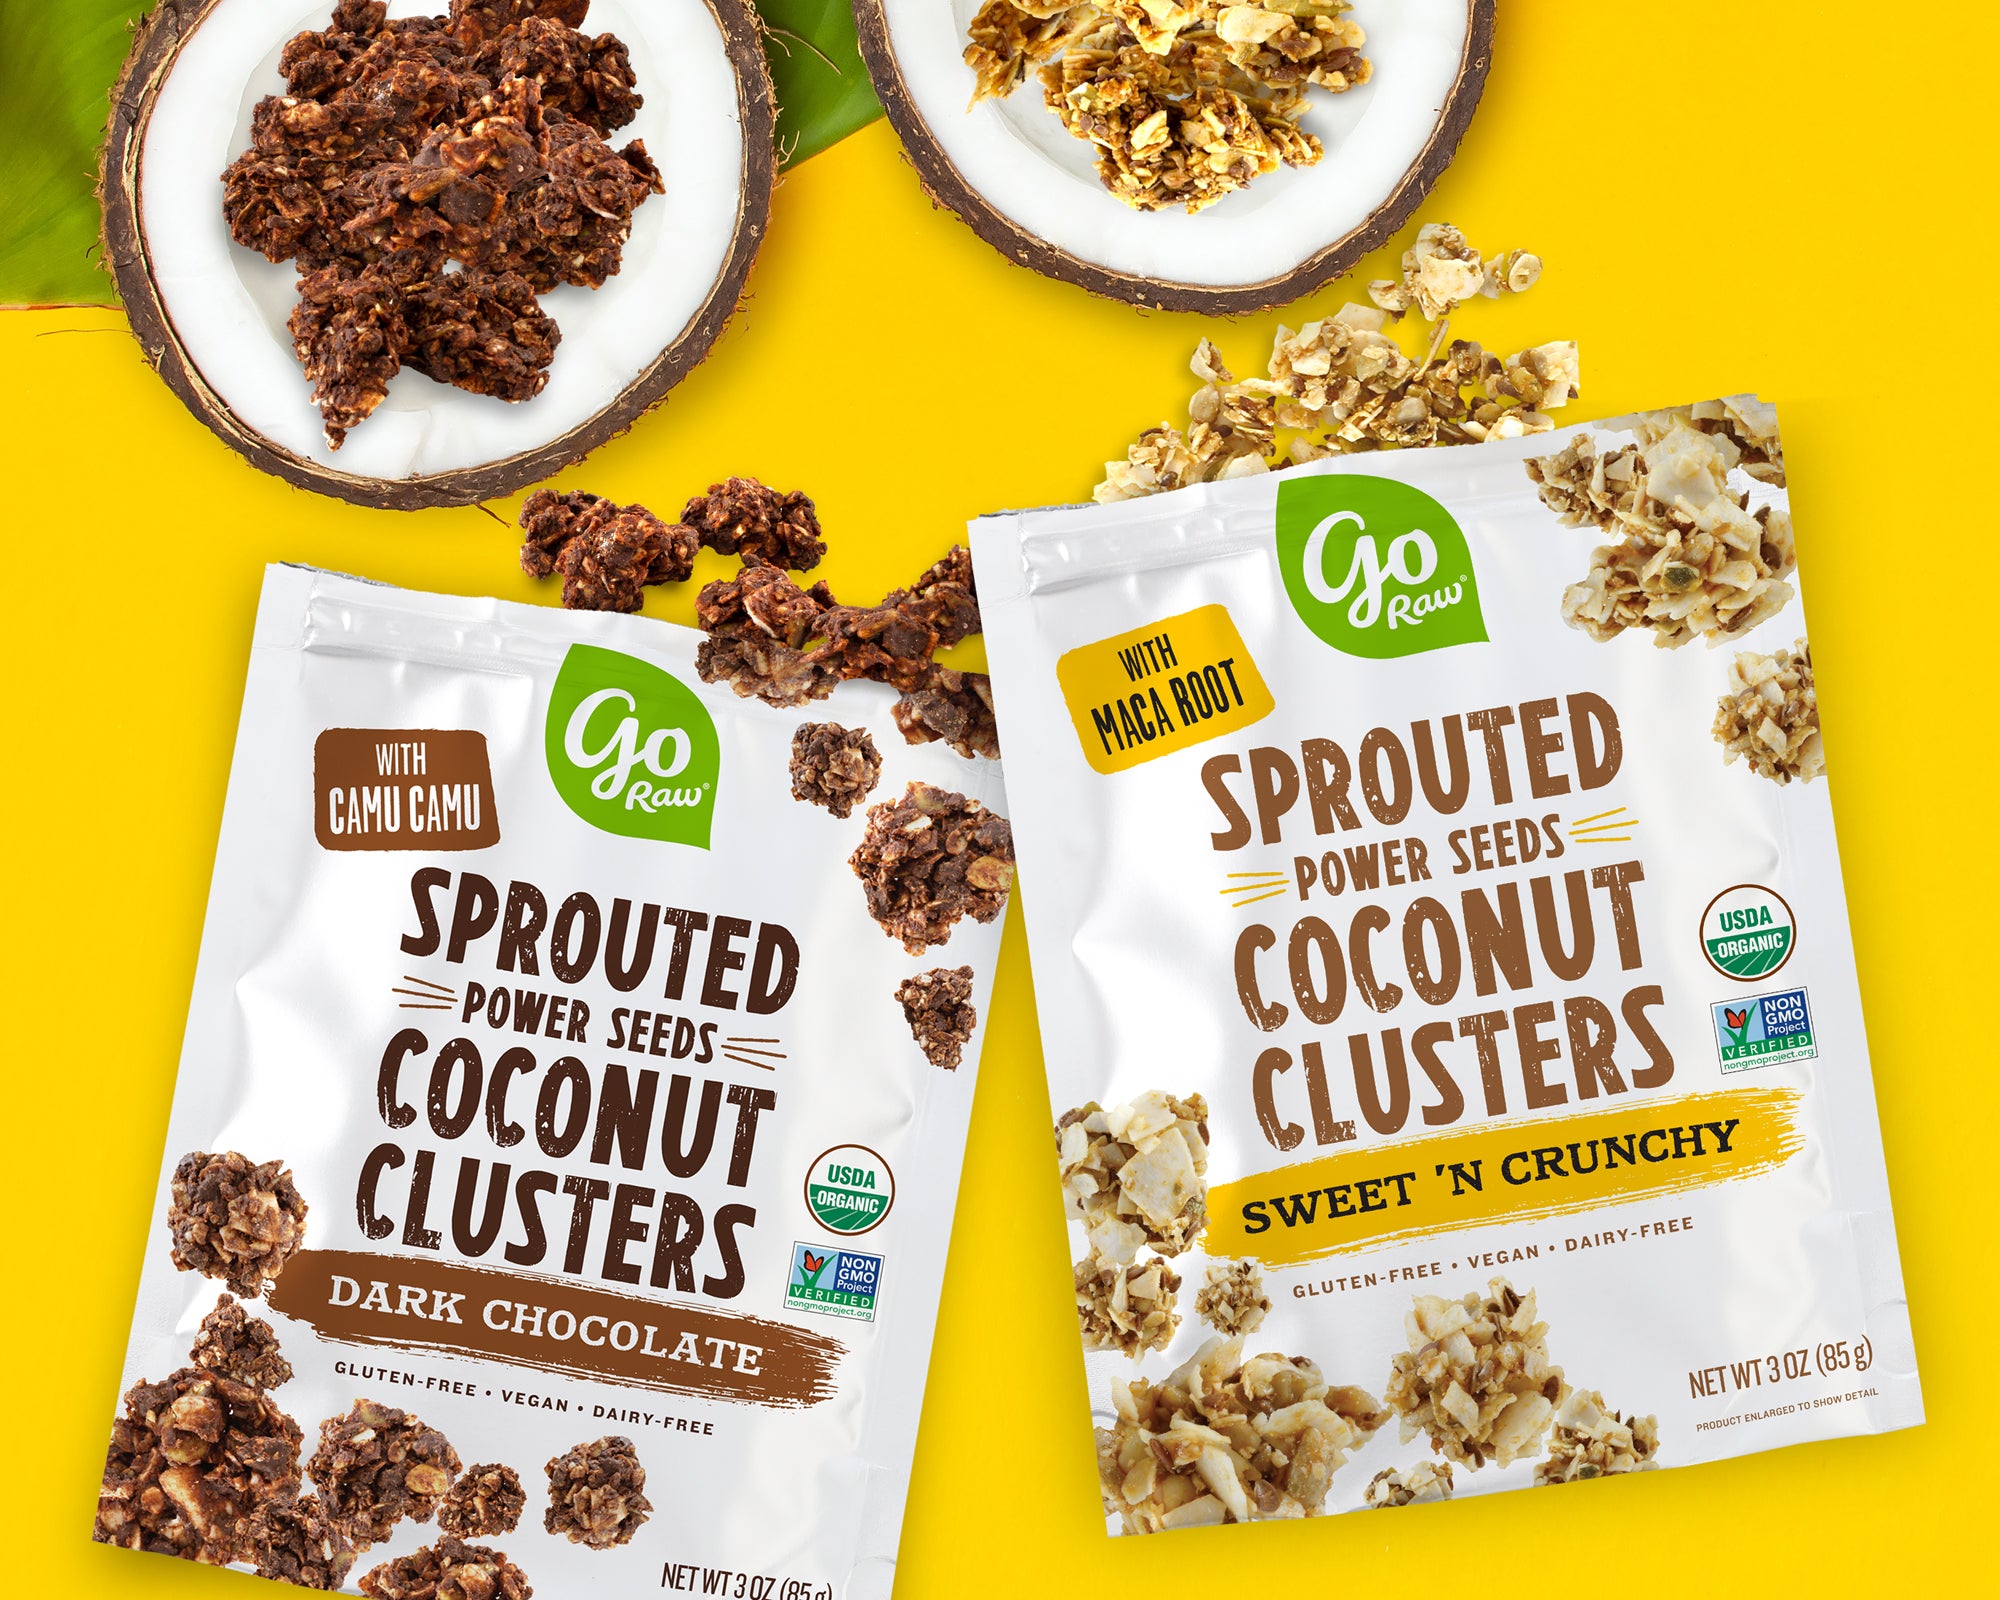 New Product Alert: Sprouted Seed Coconut Clusters!